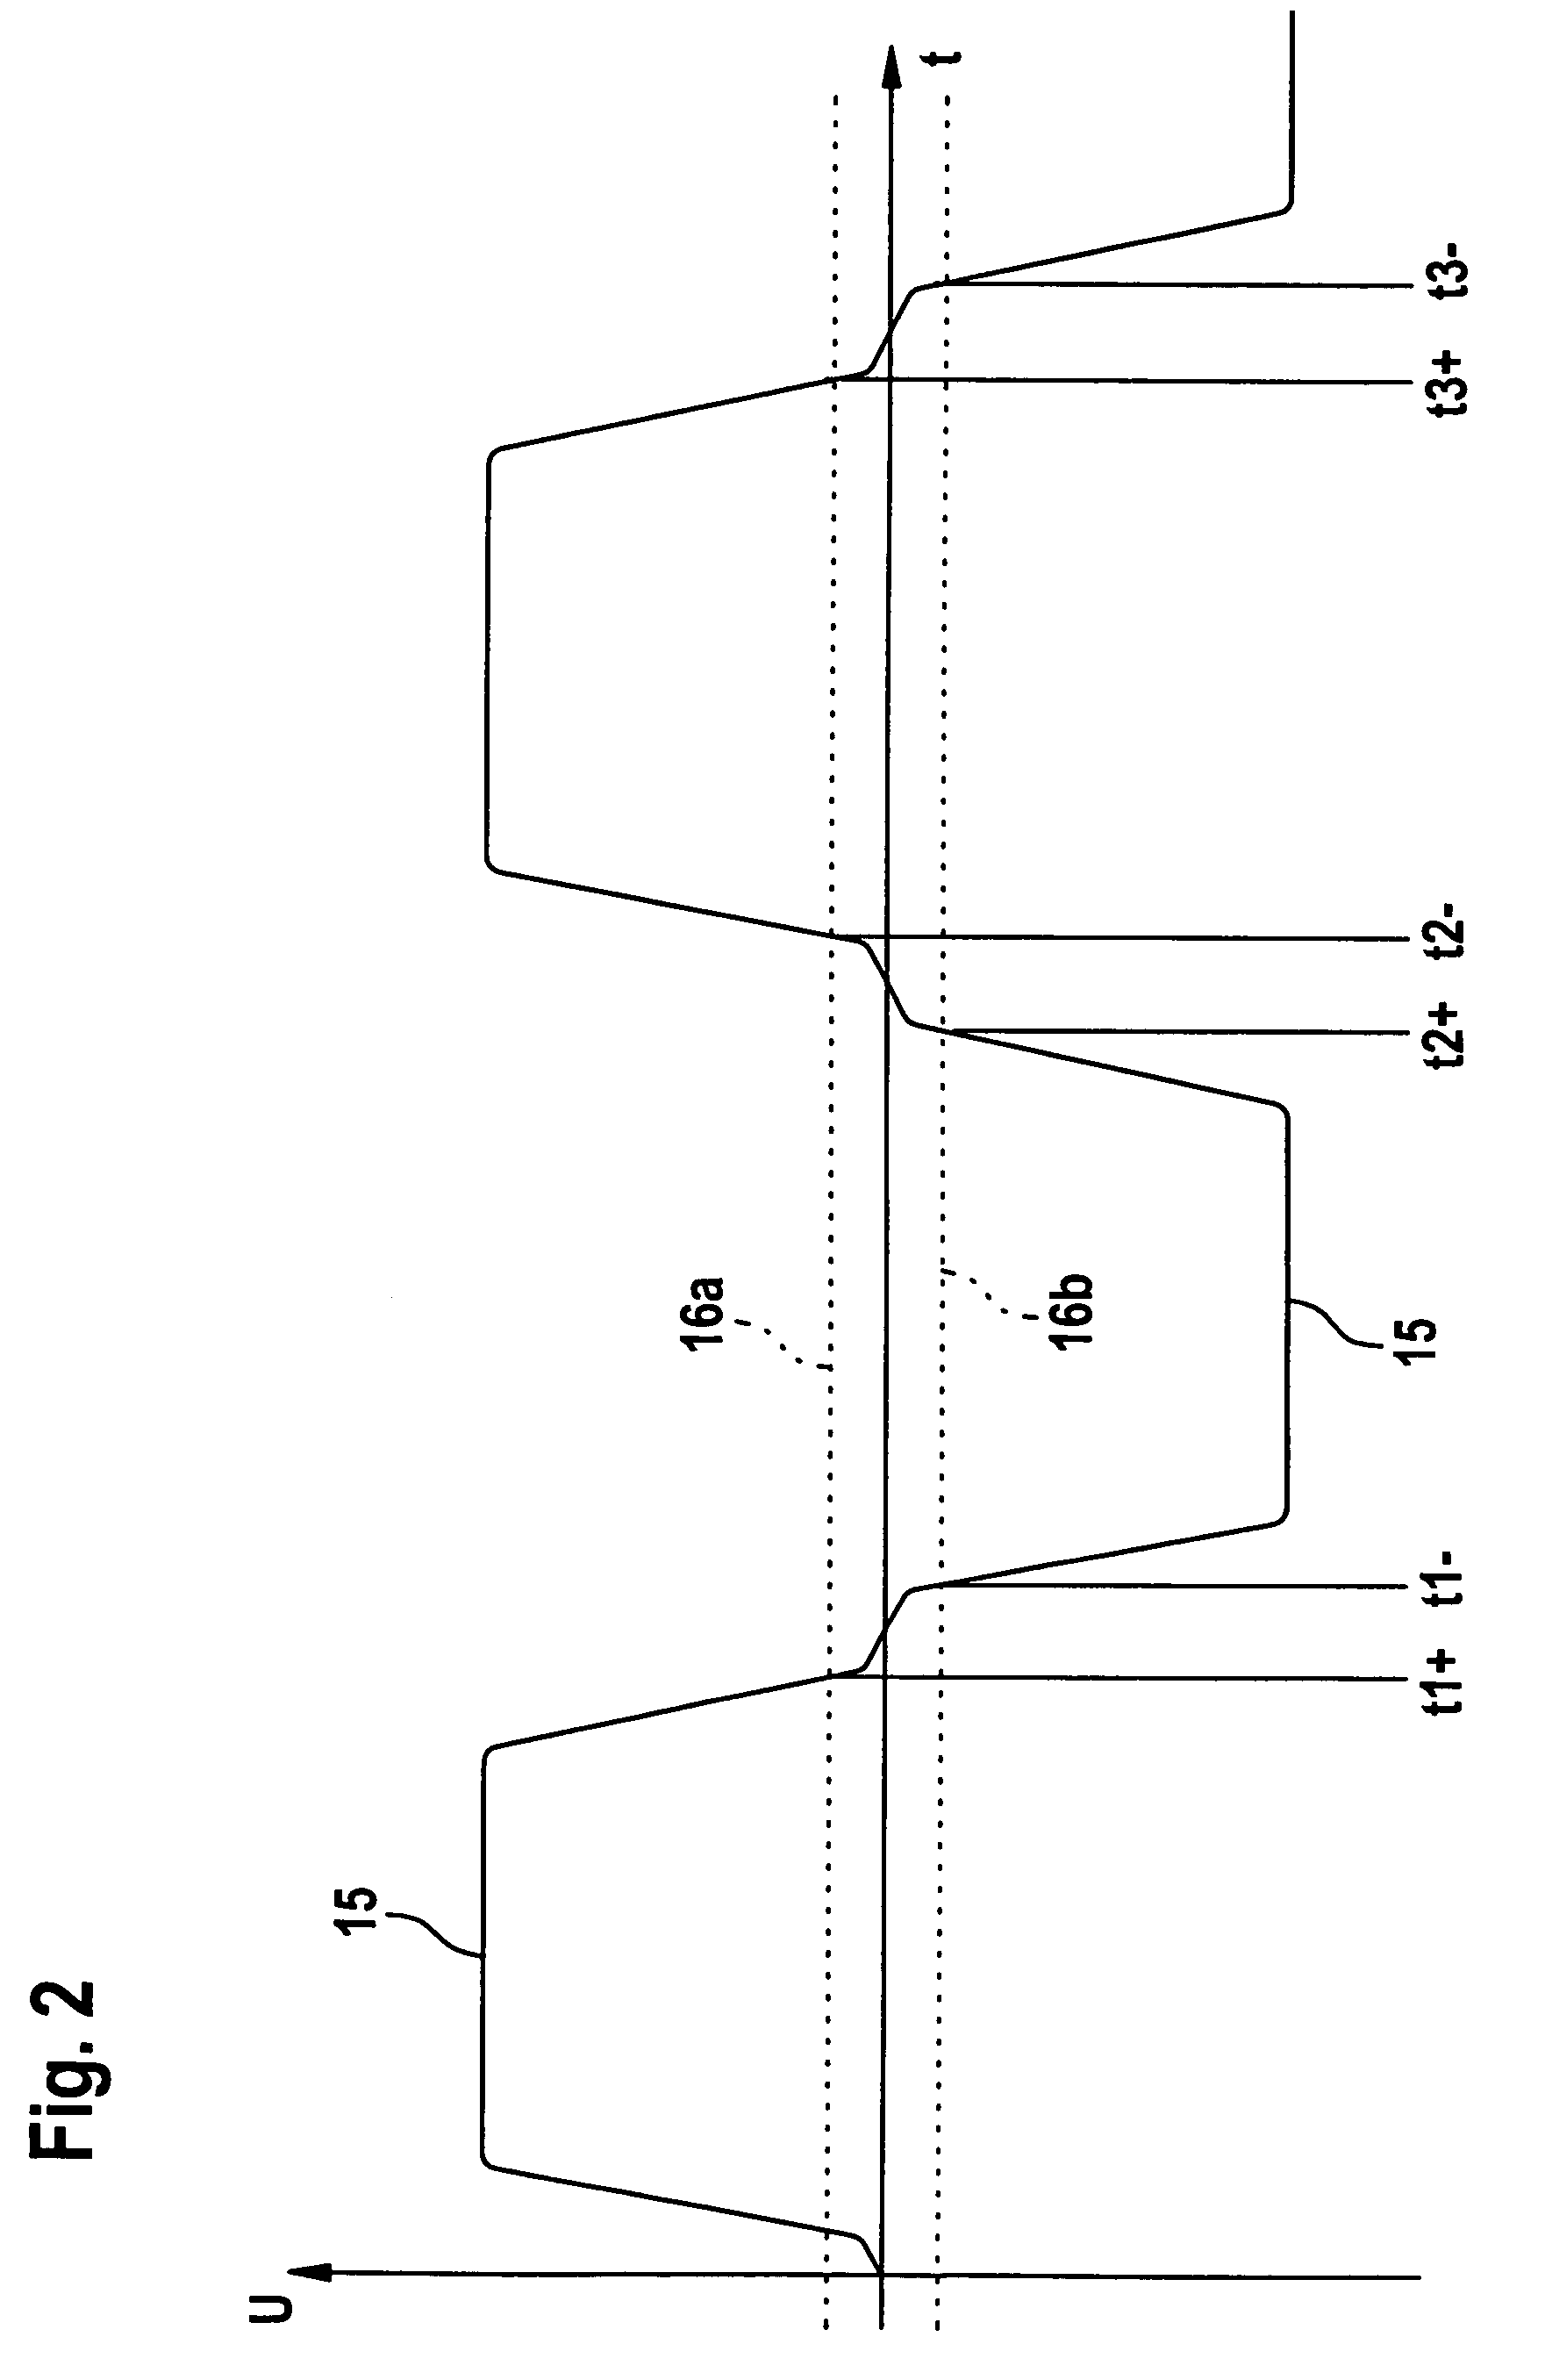 EC motor and method for operating same